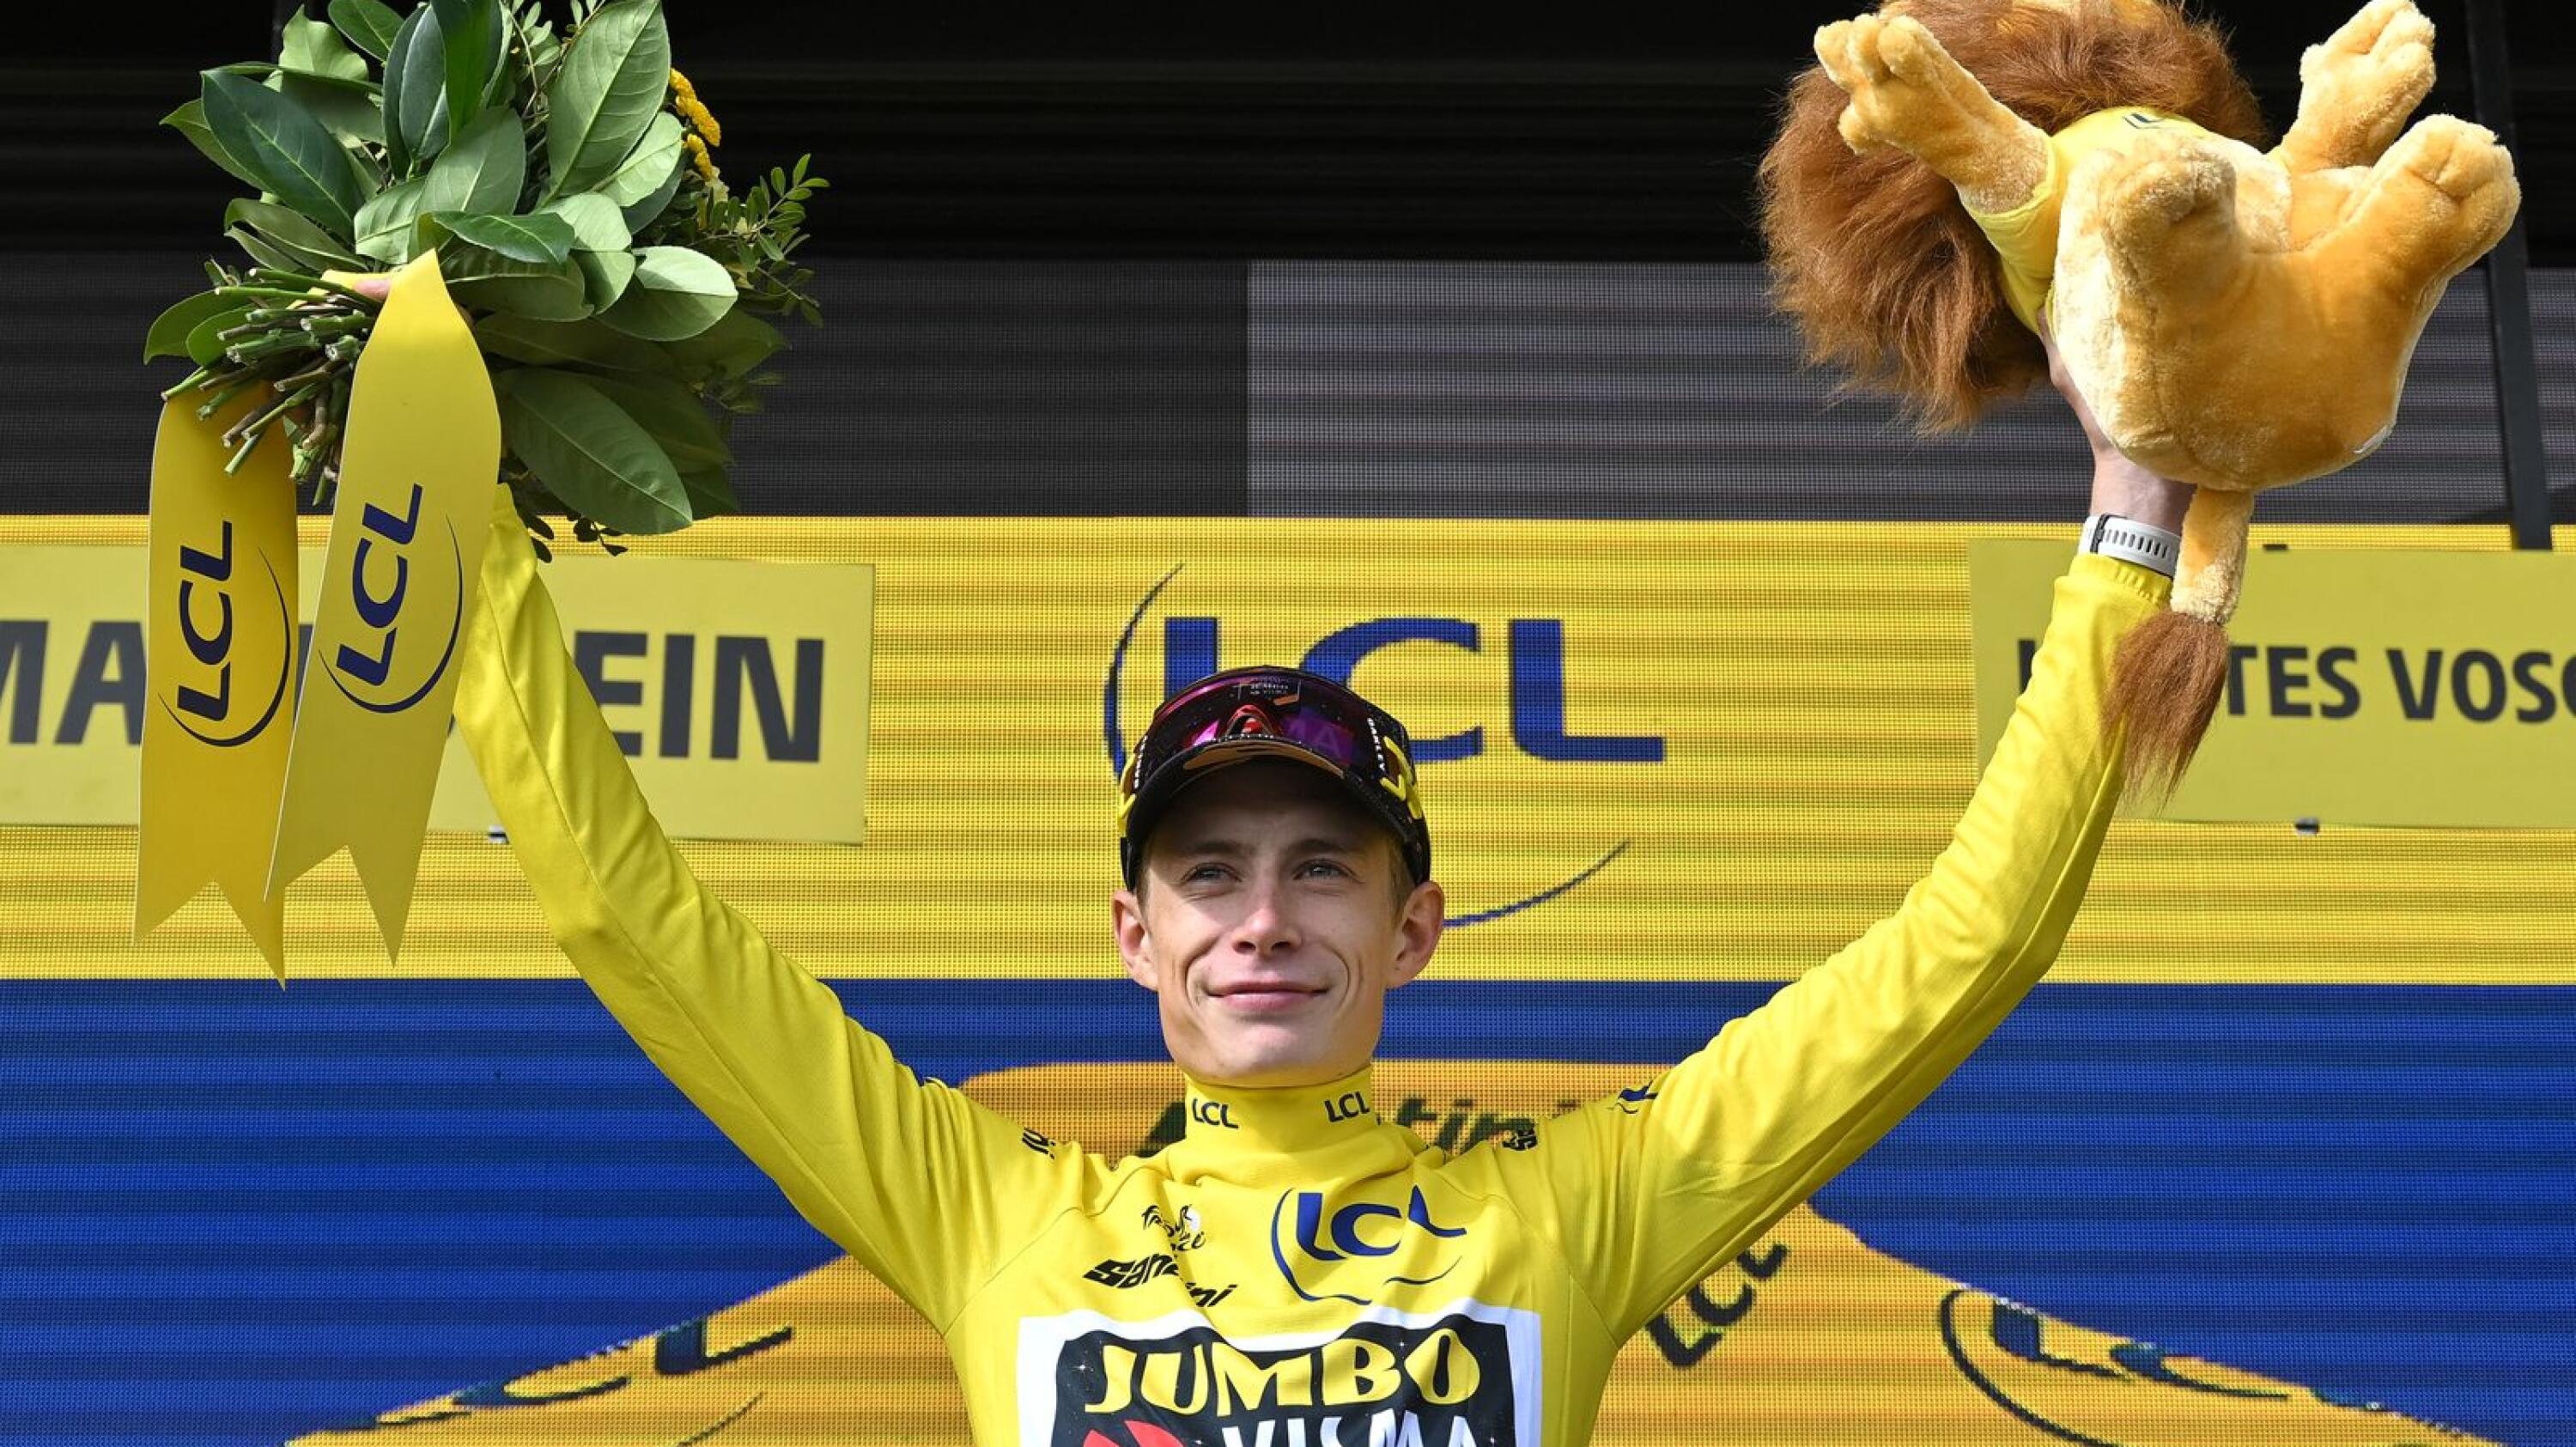 Jumbo-Visma's Danish rider Jonas Vingegaard celebrates on the podium with the overall leader's yellow jersey after the 20th stage of the 110th edition of the Tour de France cycling race on Saturday